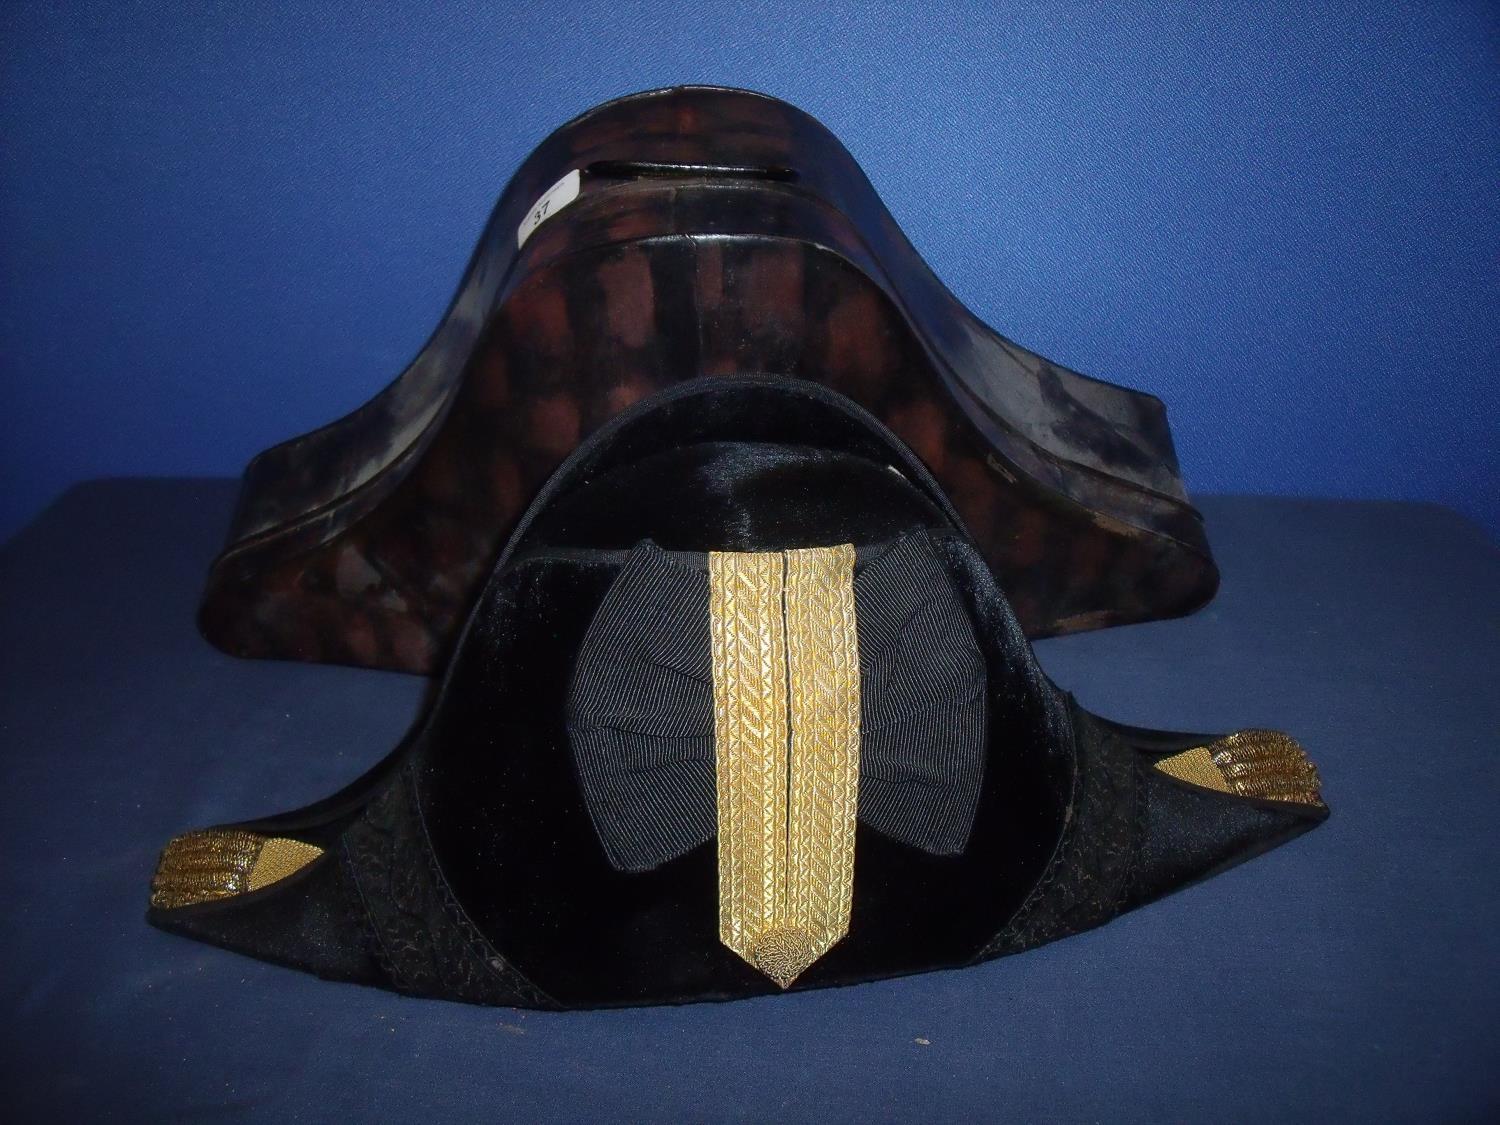 Naval officers bicorn hat with gilt braided mounts at fore and aft peaks with central braid and silk